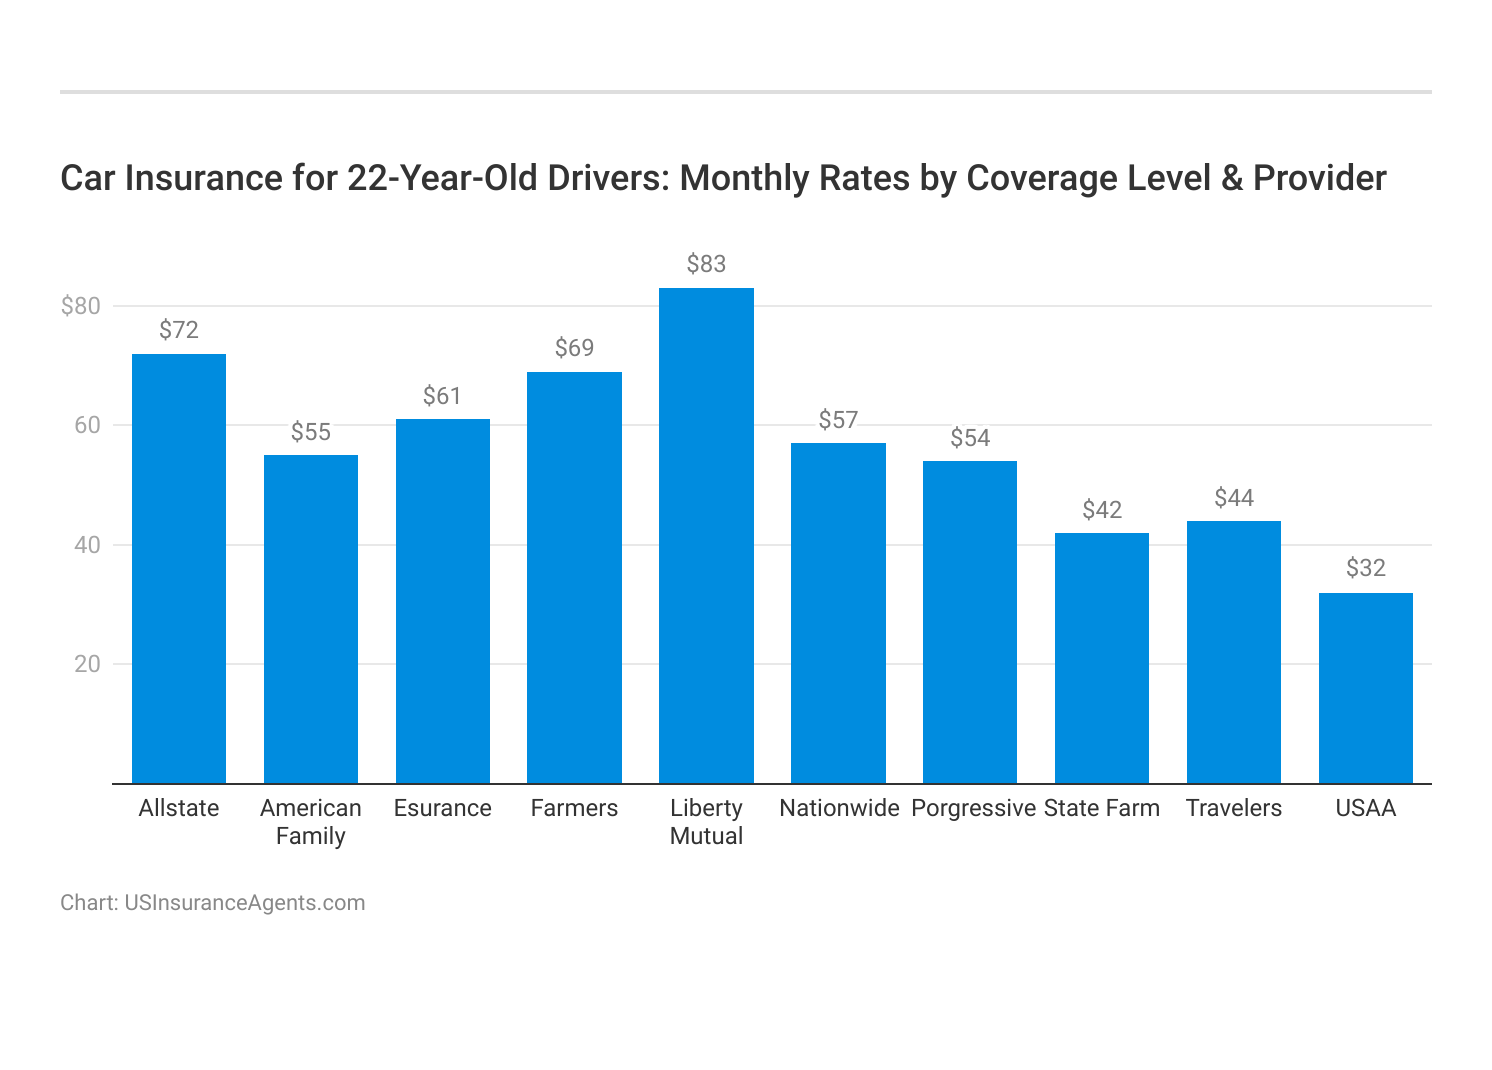 <h3>Car Insurance for 22-Year-Old Drivers: Monthly Rates by Coverage Level & Provider</h3>